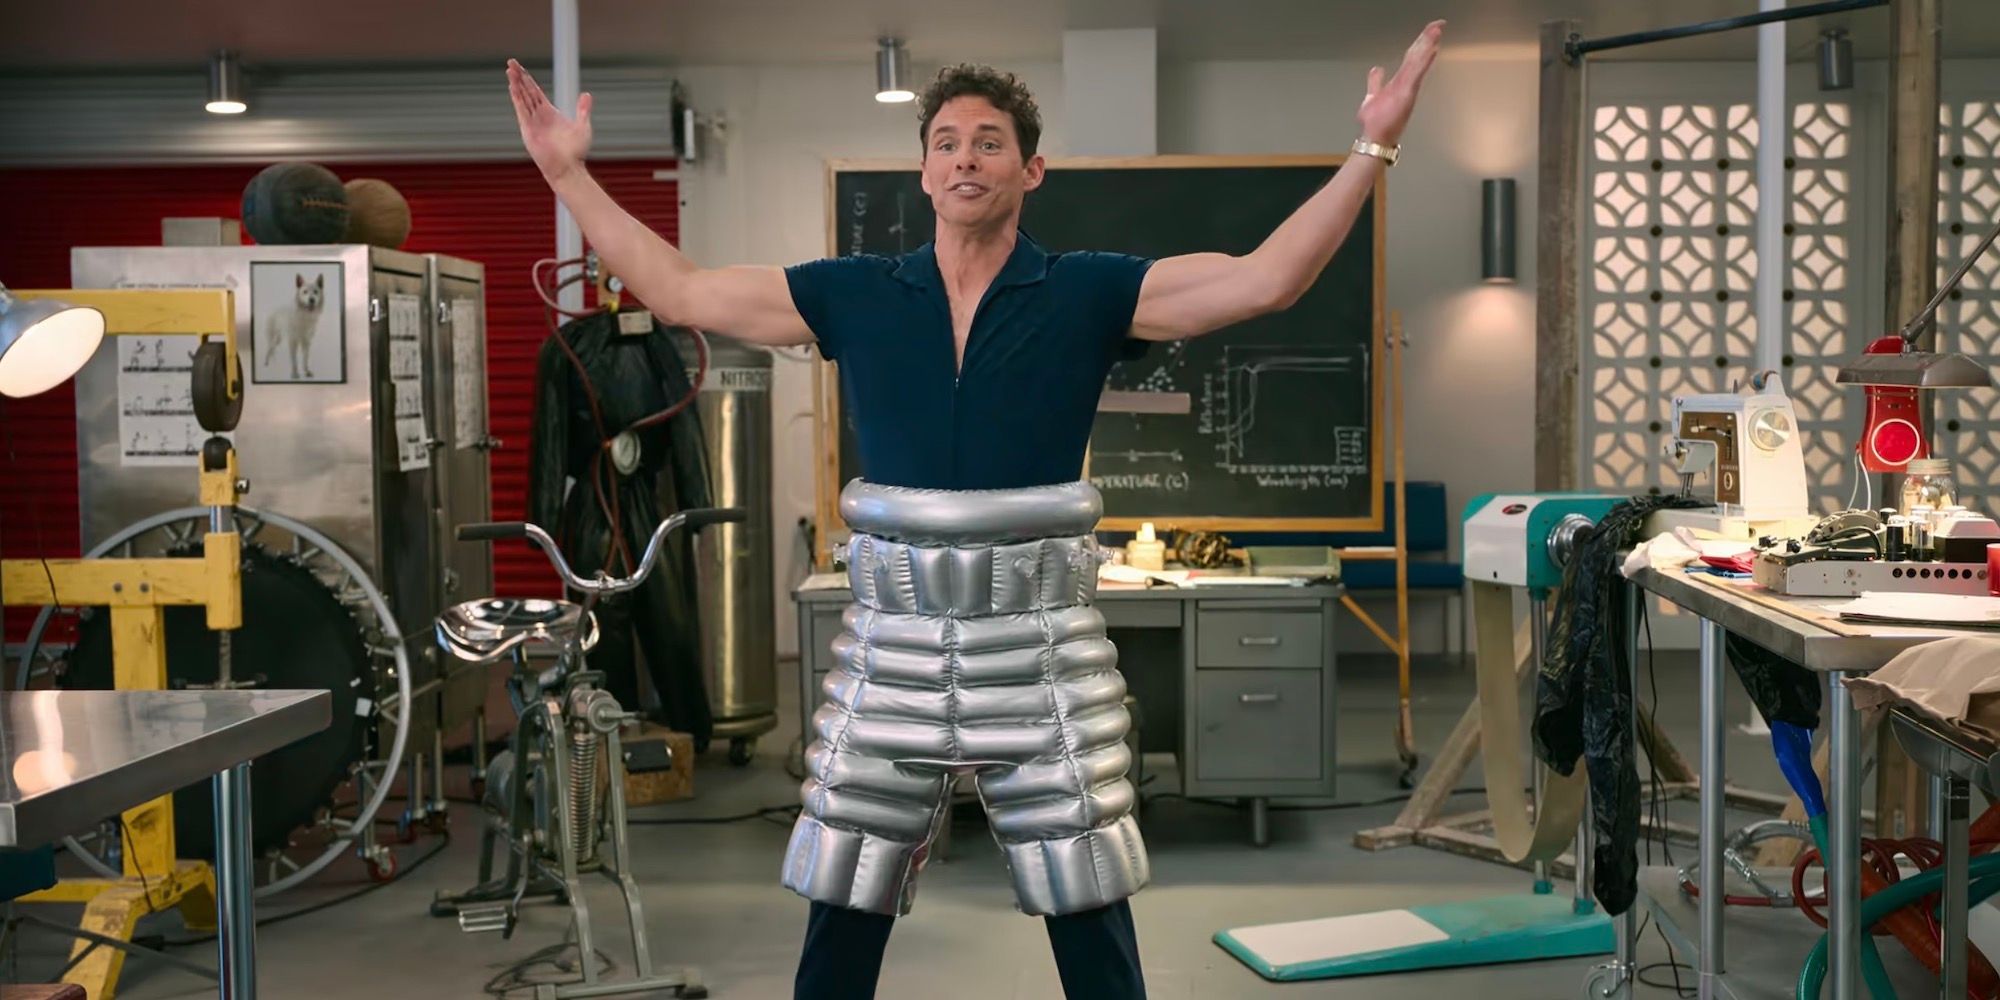 James Marsden holds his arms out while wearing foil pants.